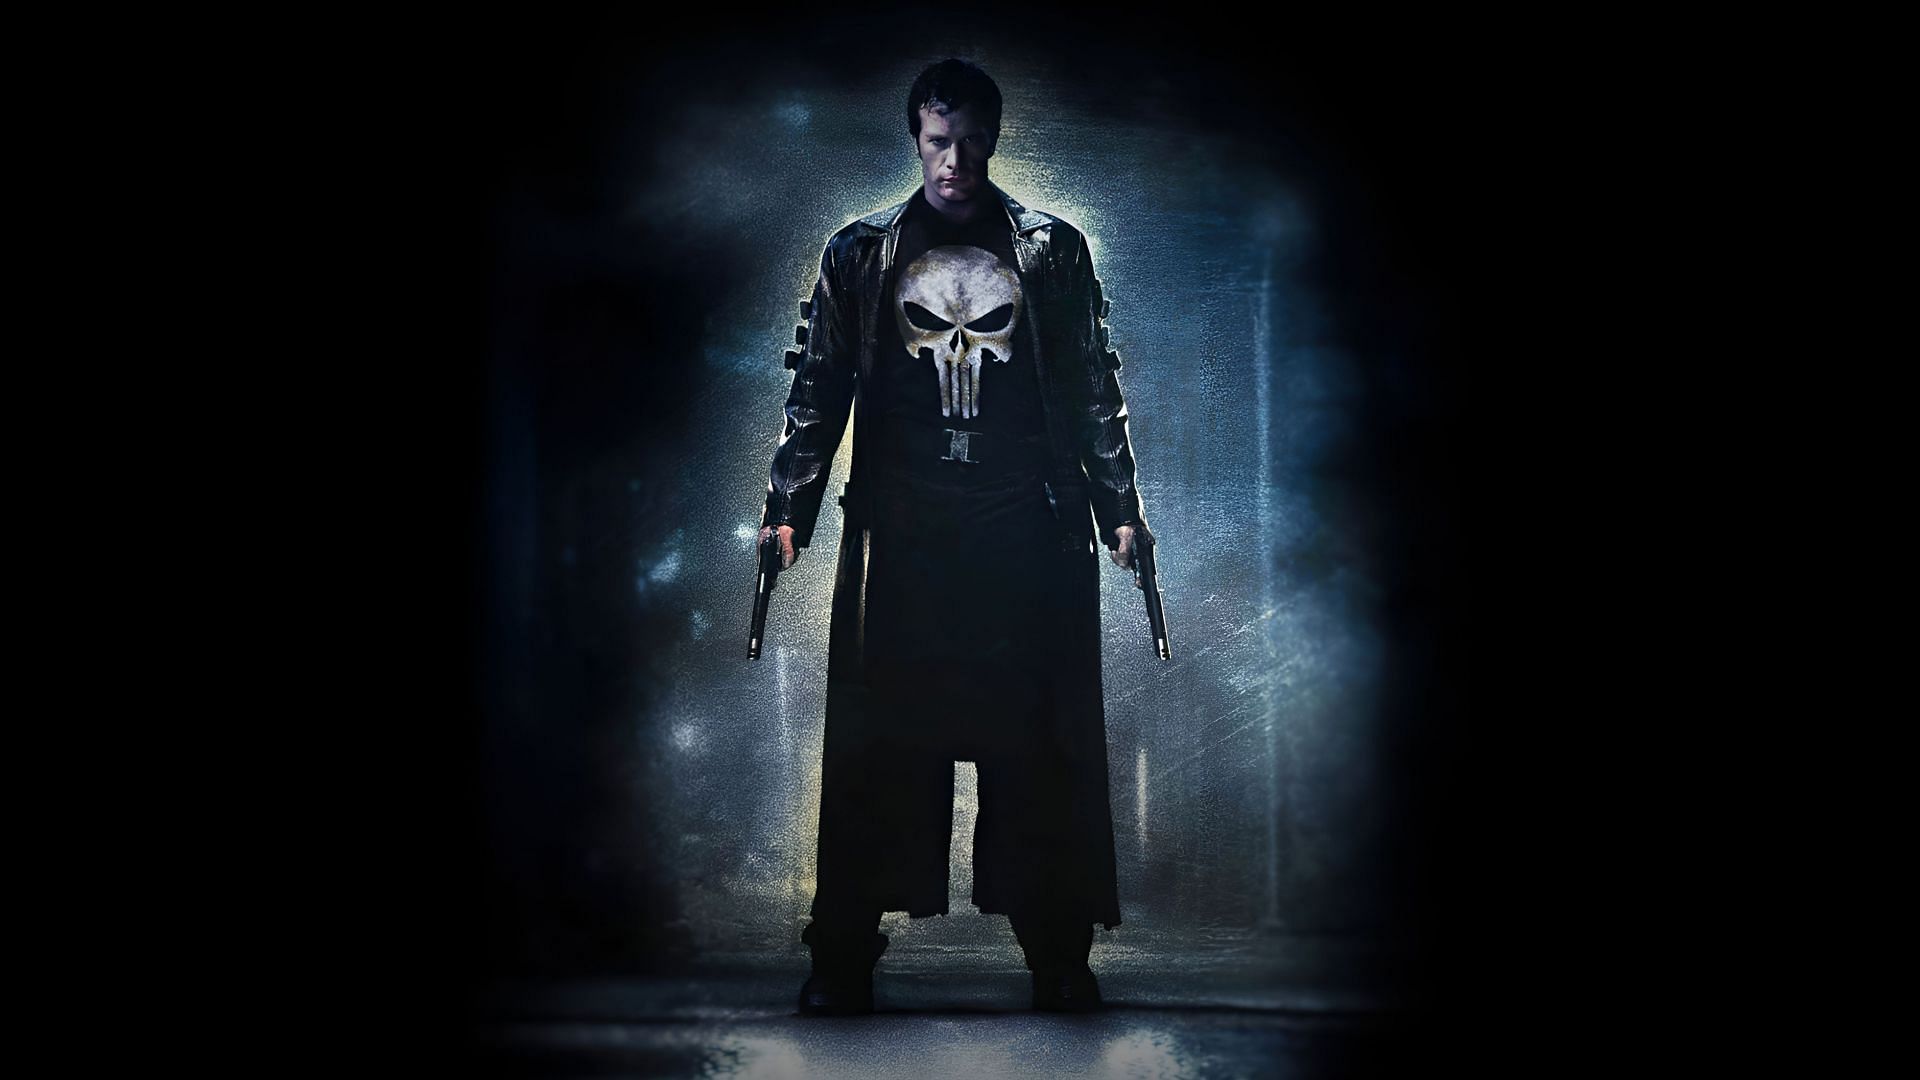 Punisher represents resilience and determination and serves as an inspiration to those who strive for justice. (Image Via Sportskeeda)